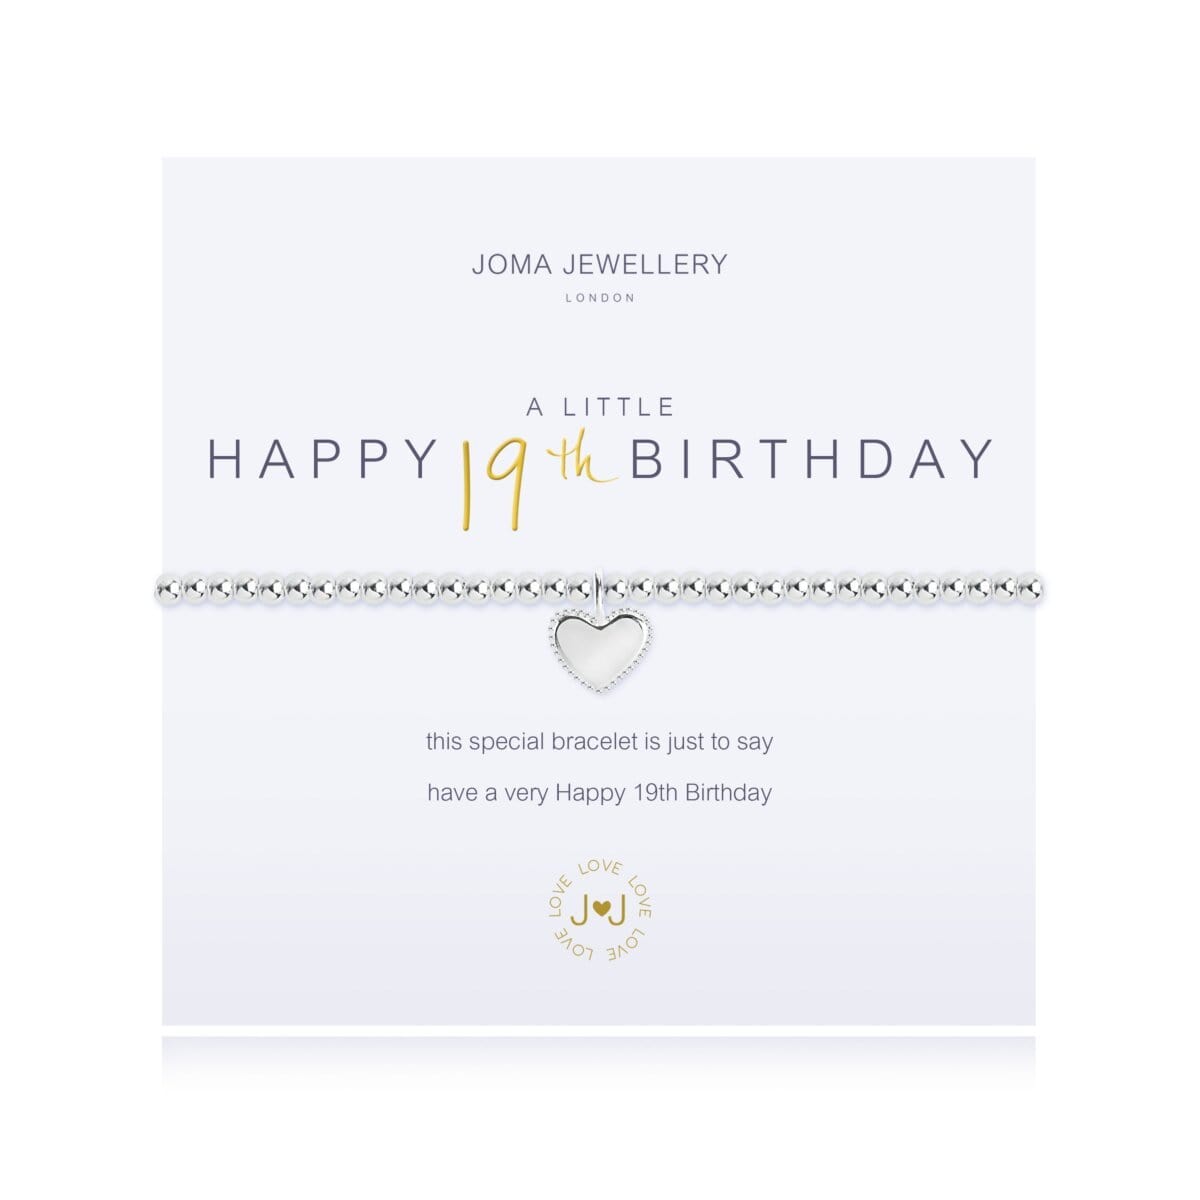 Joma Jewellery Bracelet Joma Jewellery Bracelet - A Little Happy 19th